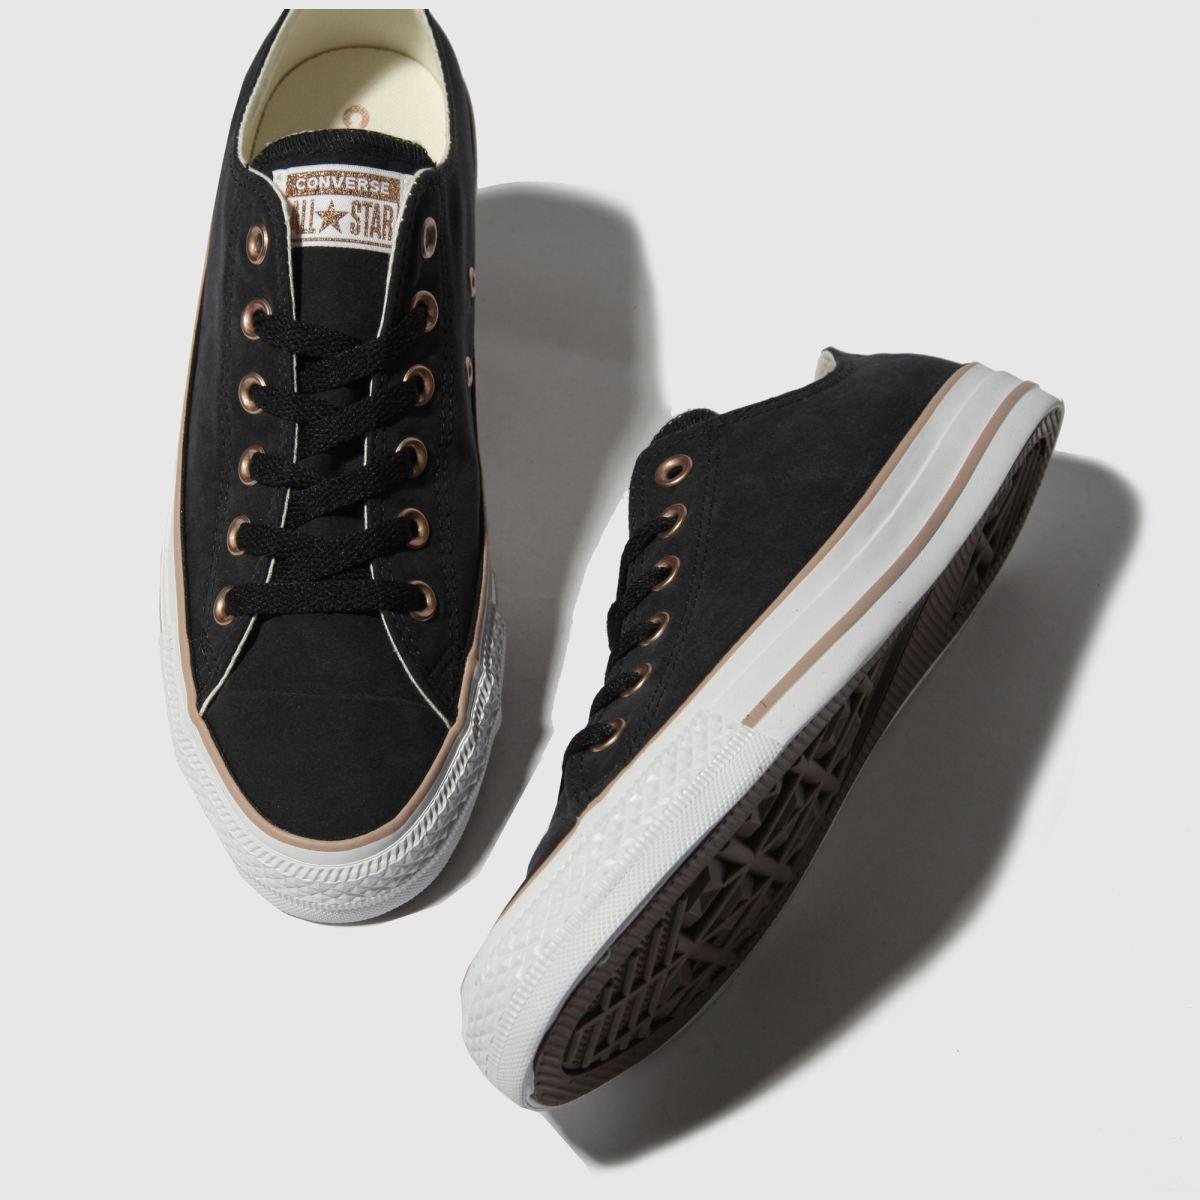 converse all star peached canvas